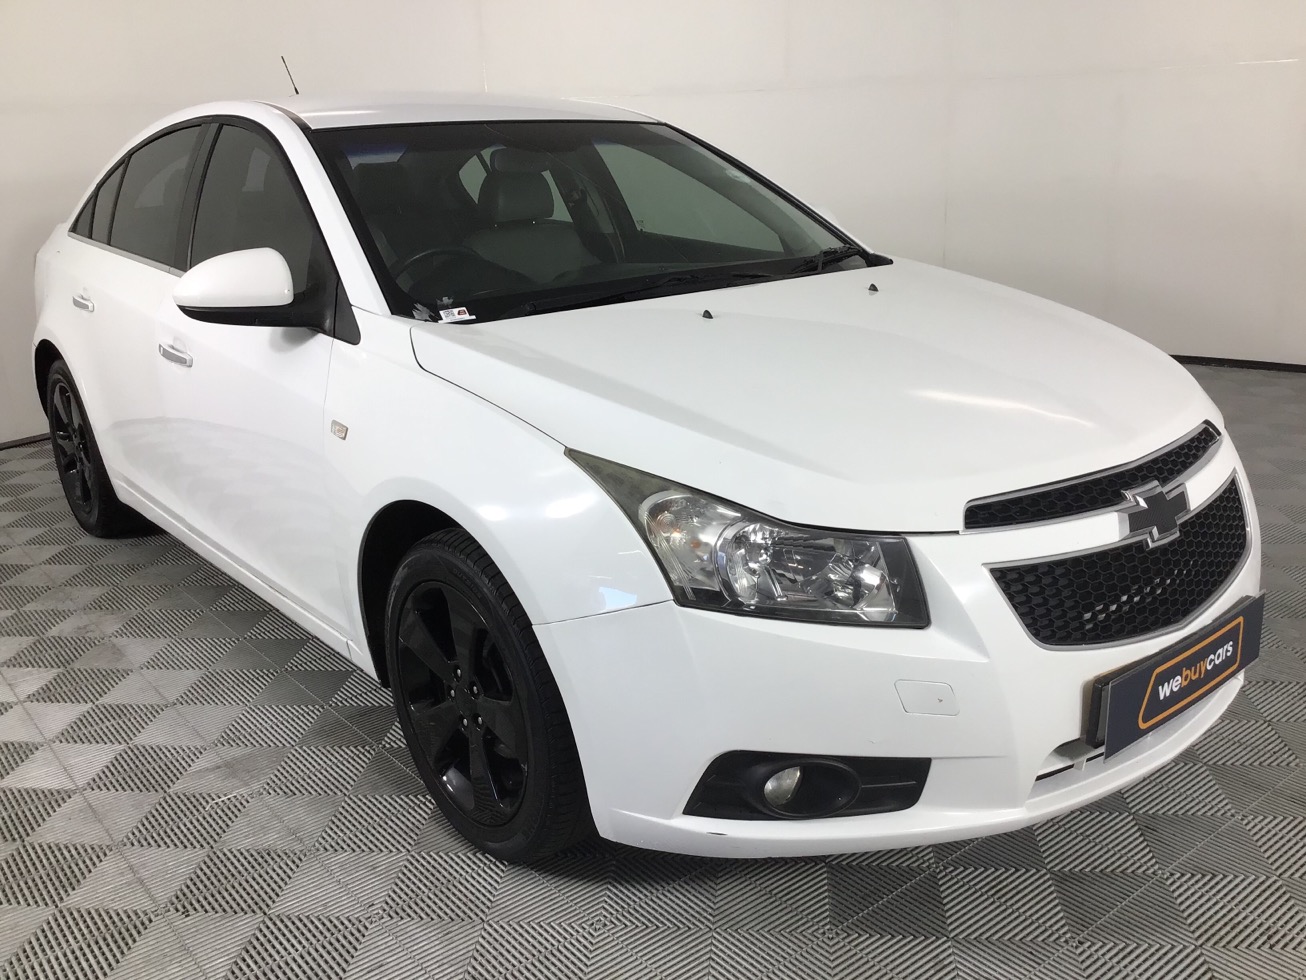 Used 2012 Chevrolet Cruze 1.8 LT Auto for sale WeBuyCars